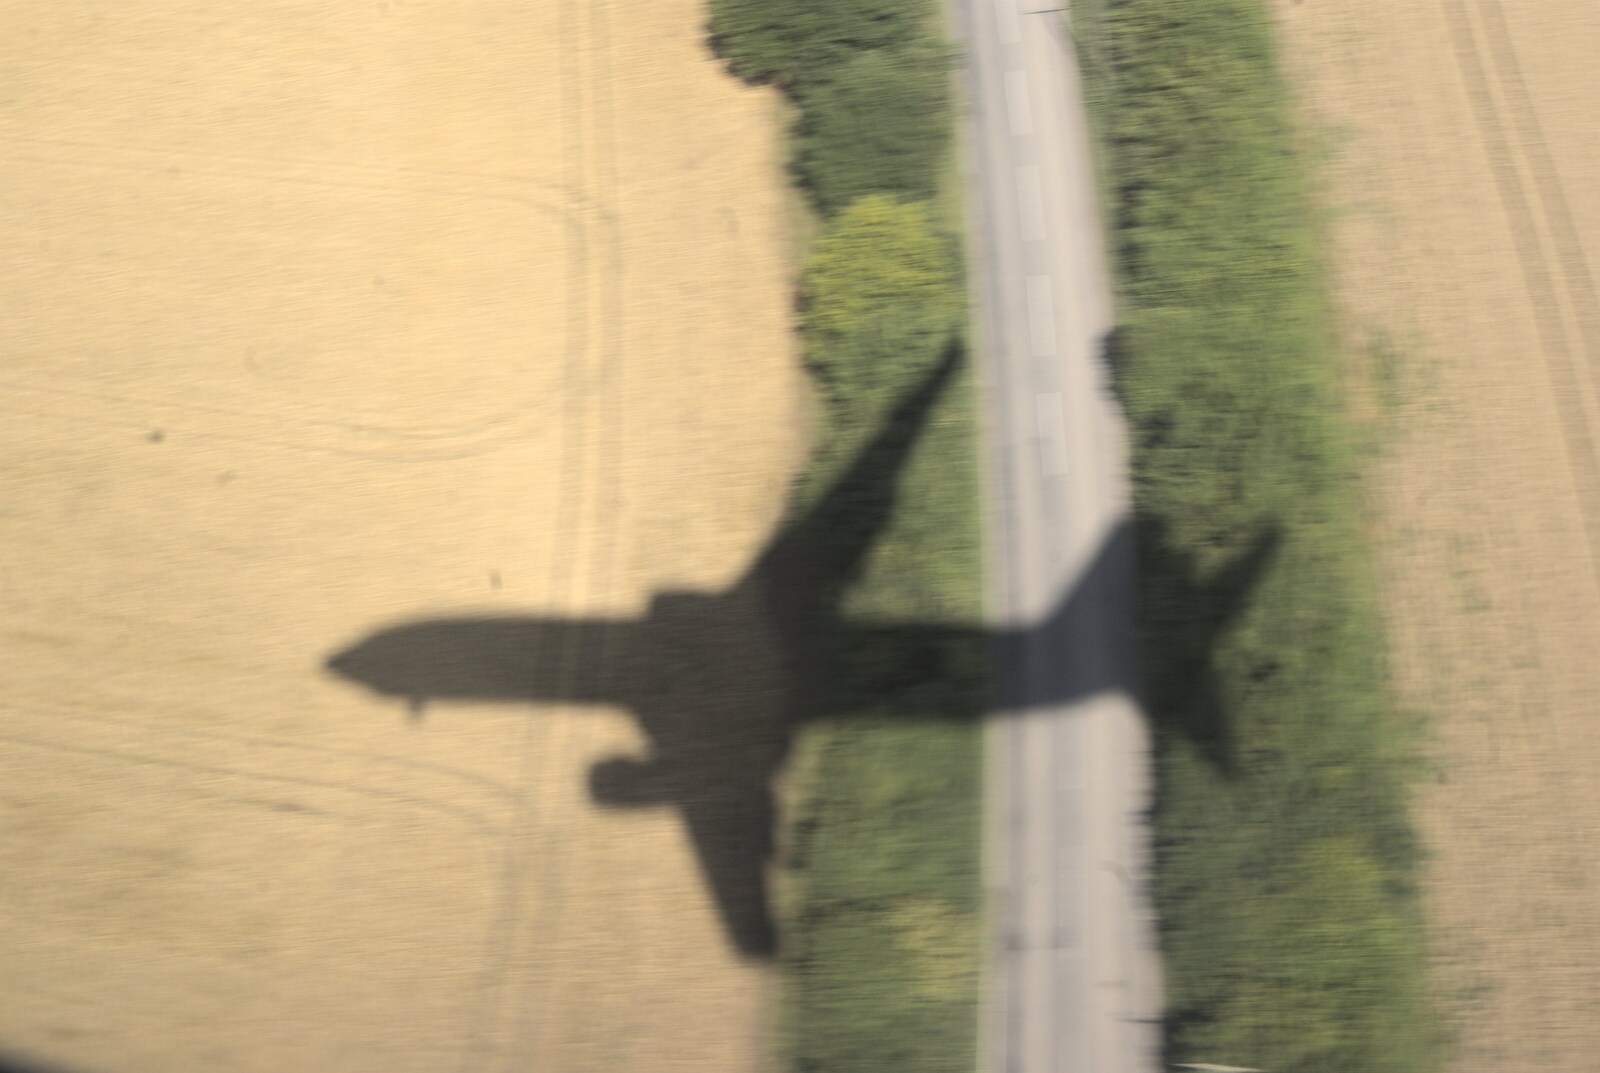 The shadow of the plane from A Trip to Dingle, County Kerry, Ireland - 21st July 2009